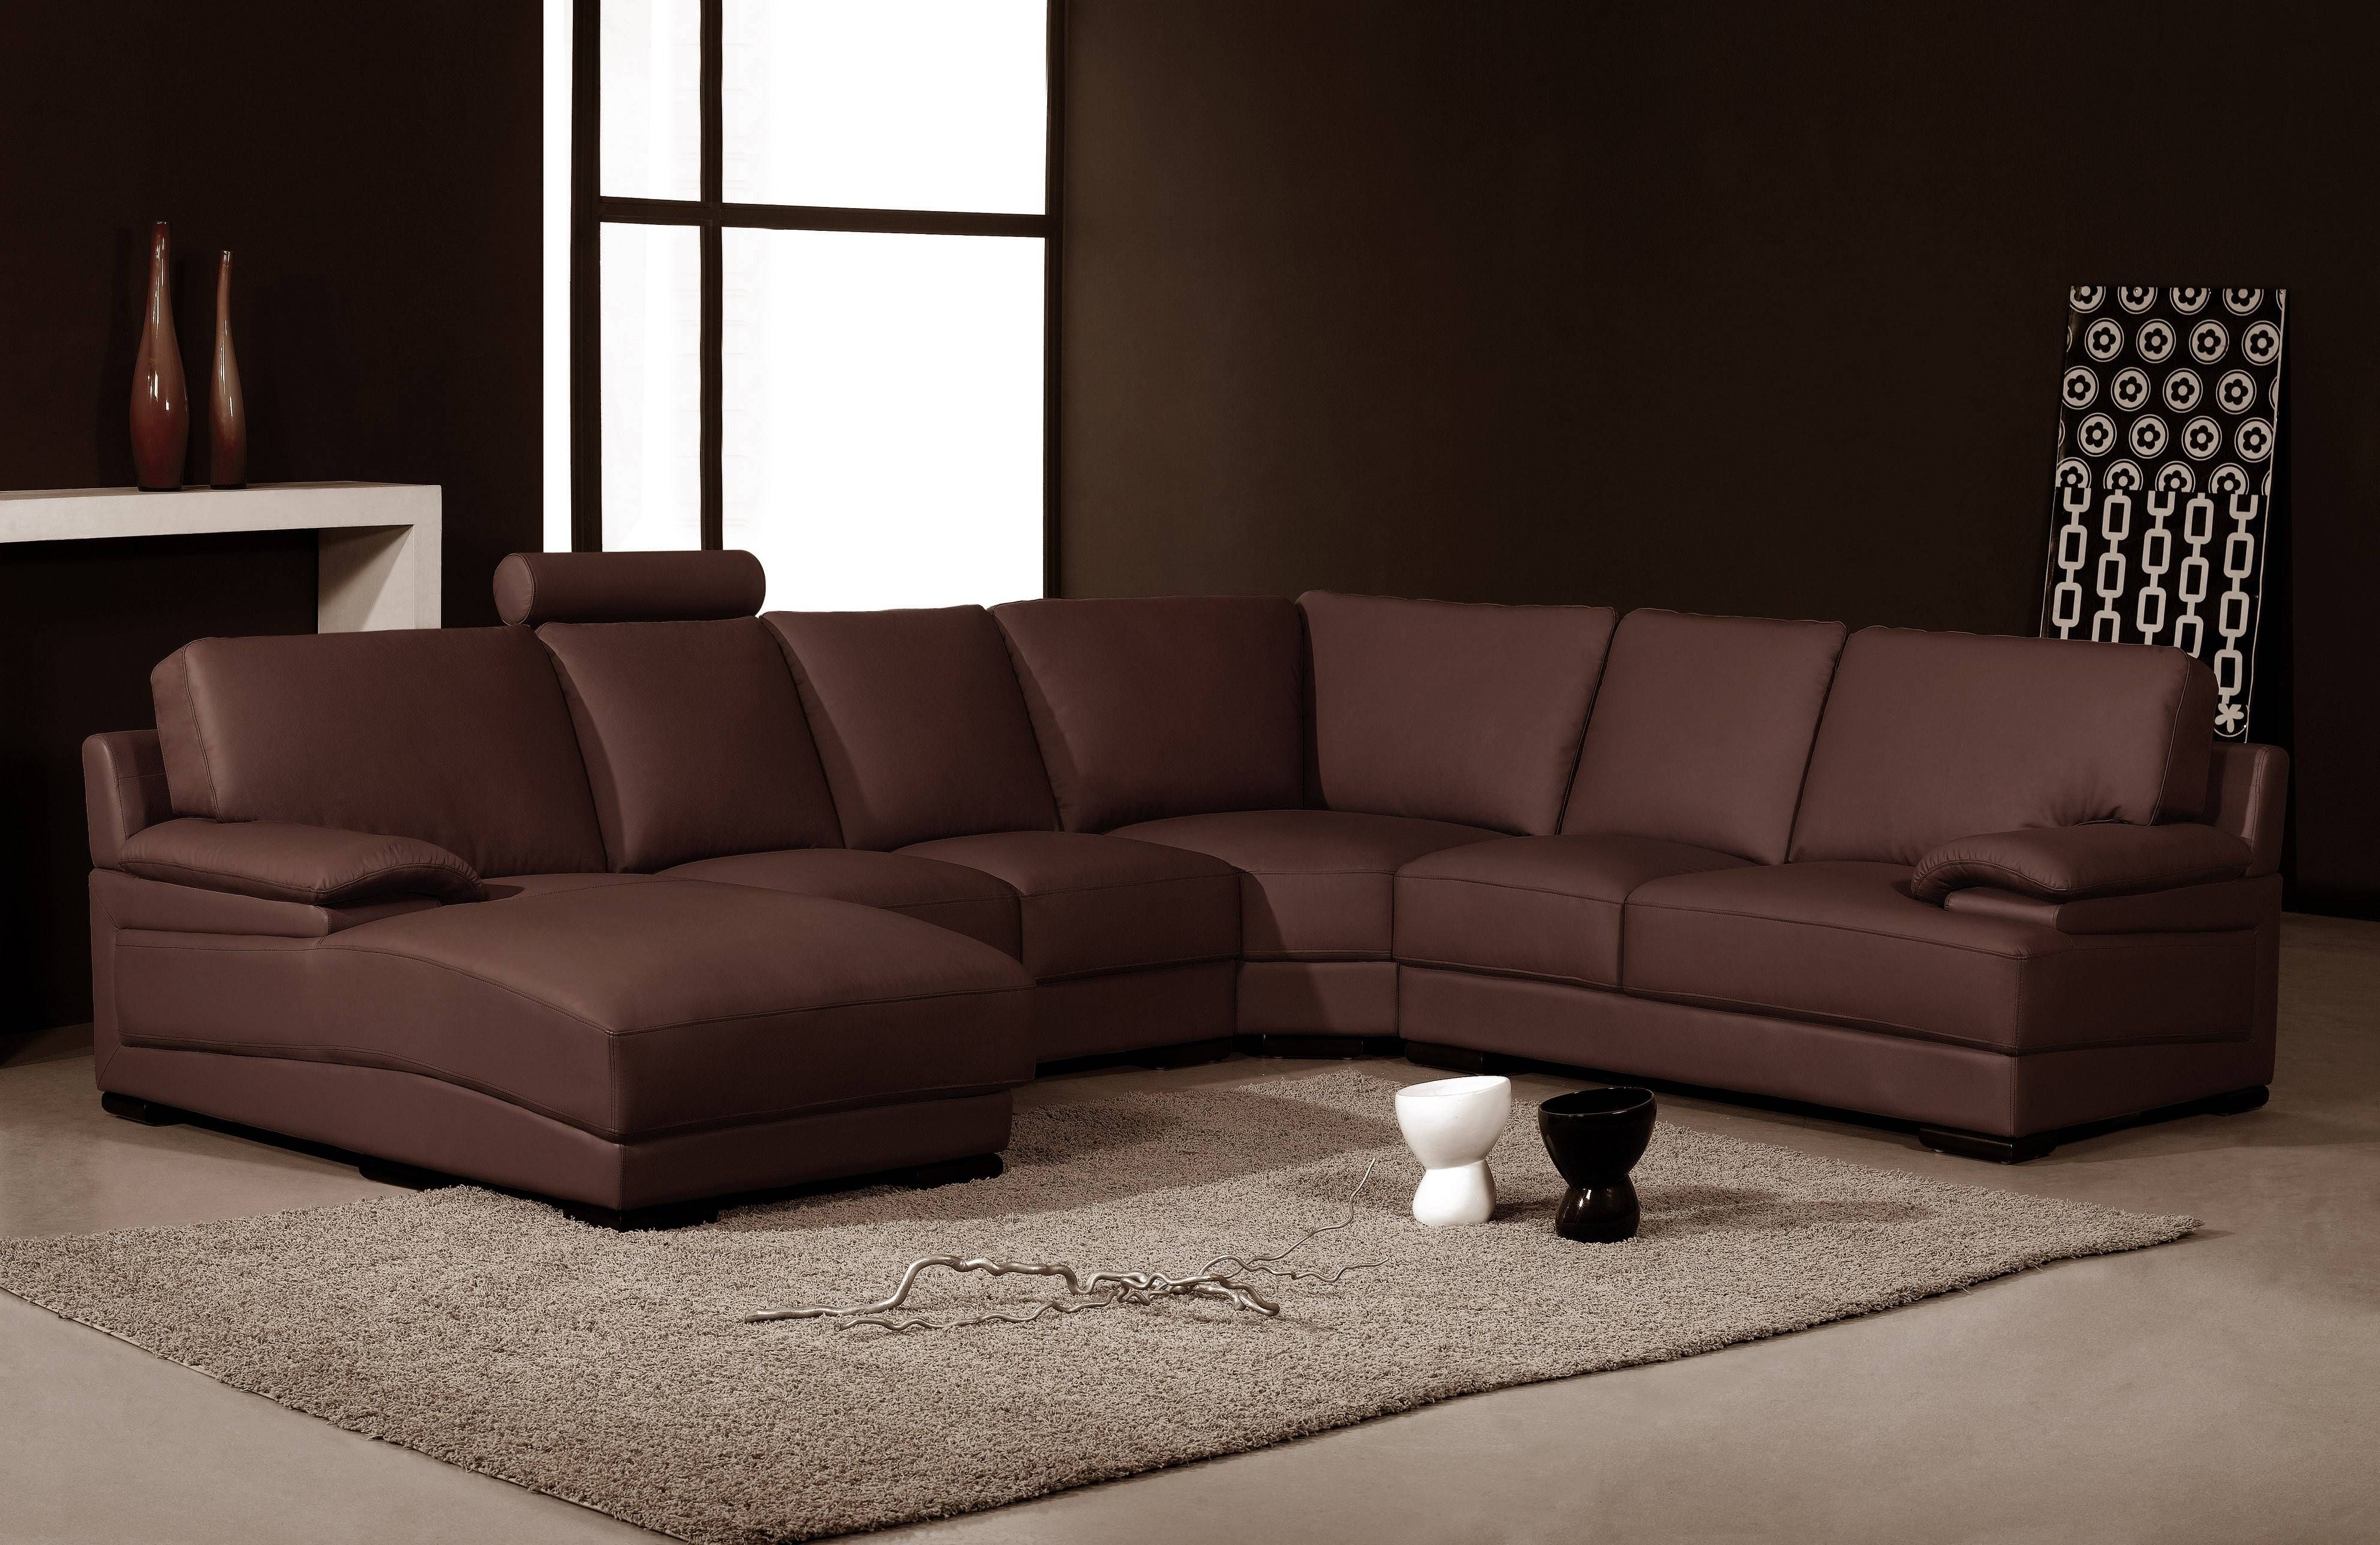 Furniture: Create Your Comfortable Living Room Decor With Round Regarding Leather Modular Sectional Sofas (View 24 of 30)